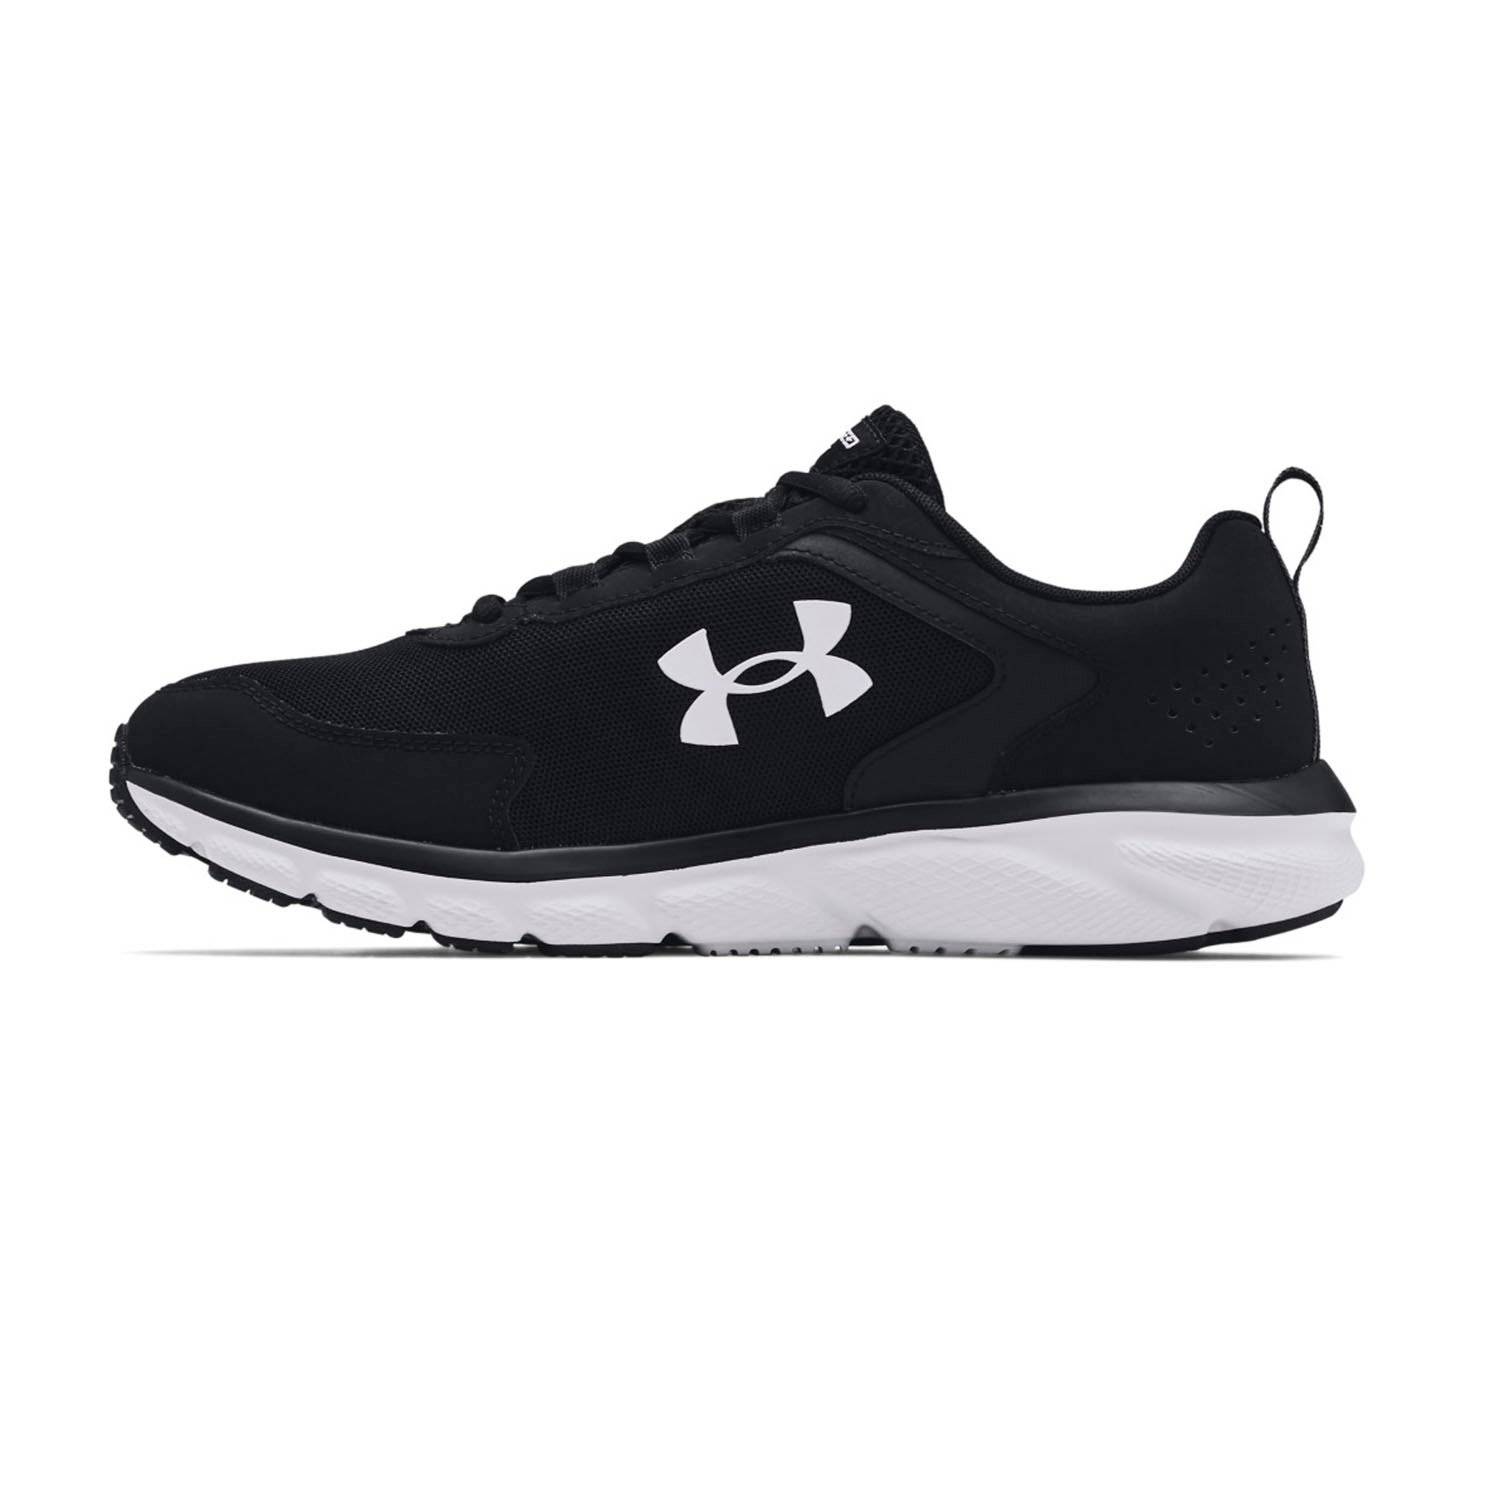 Under Armour Charged Assert 9 Running Shoes